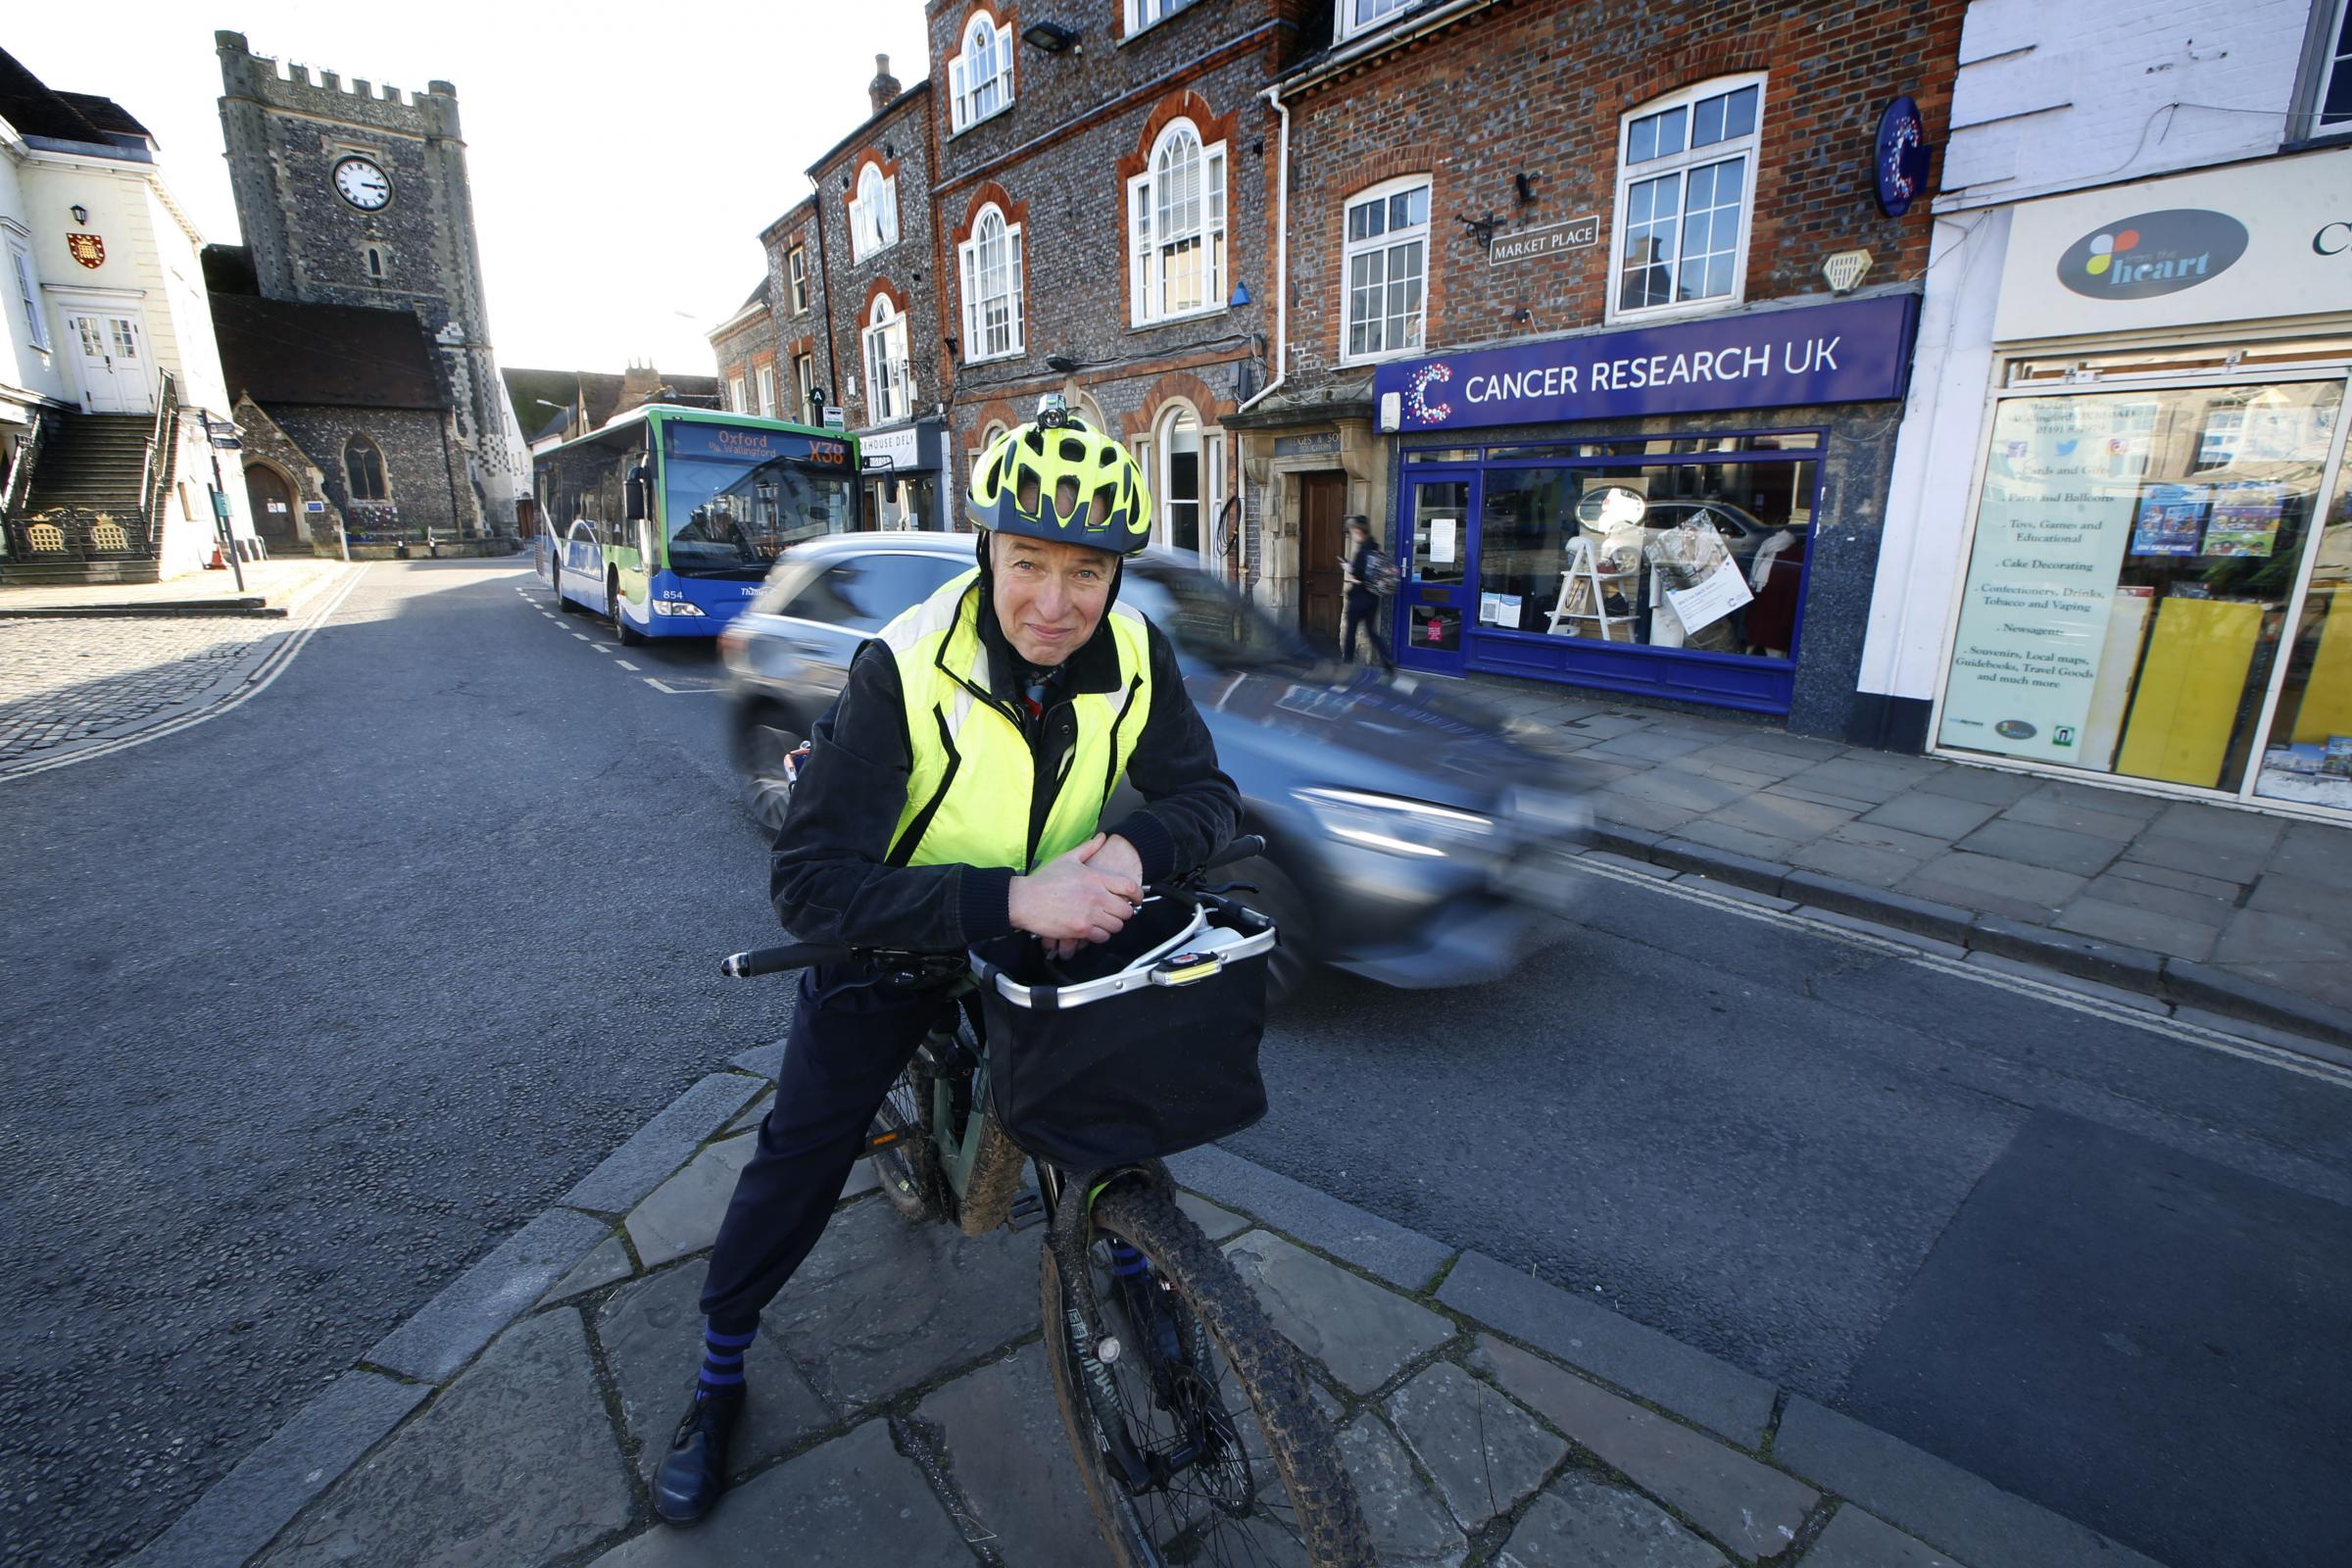 County Councillor Dr Pete Sudbury pushes for 20mph zones for public safety in the Wallingford town centre..28/02/2021.Picture by Ed Nix..